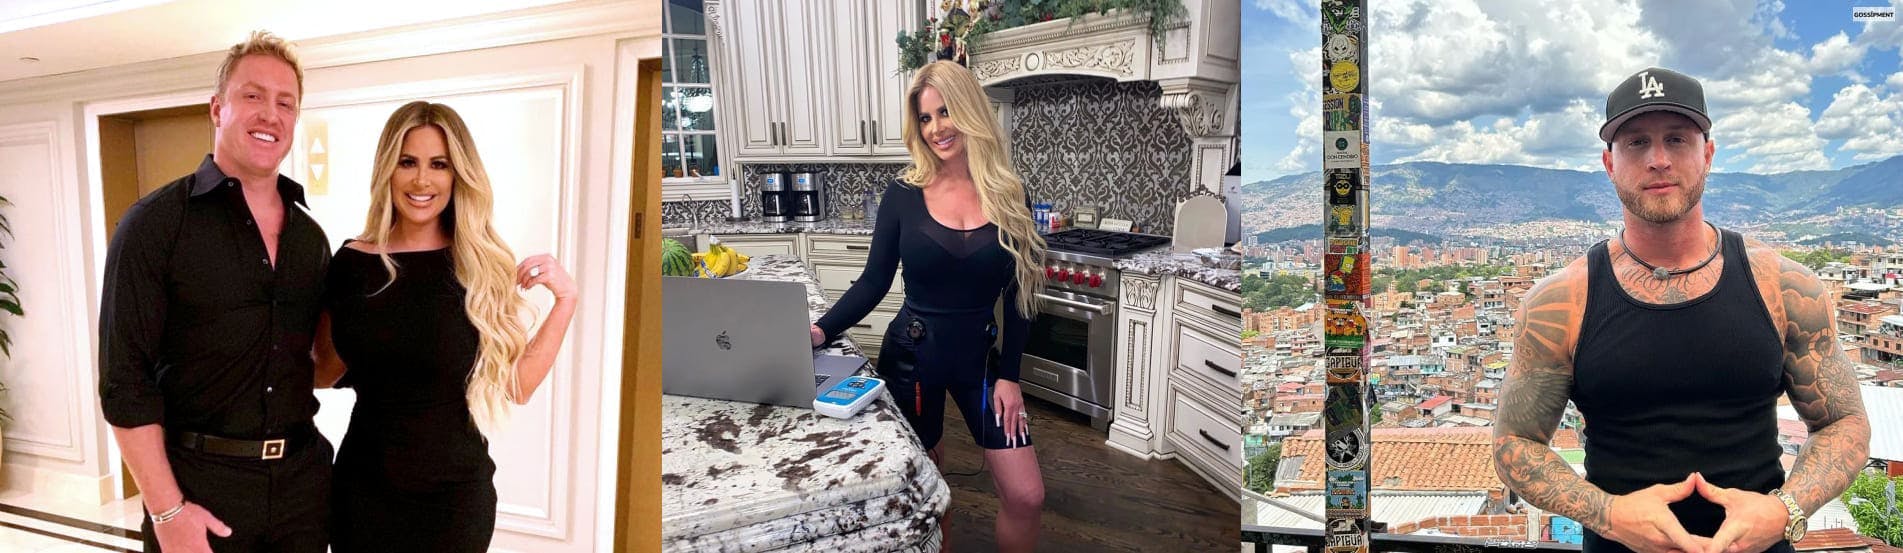 Cover Image for Kim Zolciak Reported Flirting With Chet Hanks Amid Messy Divorce Drama With Kroy Biermann.